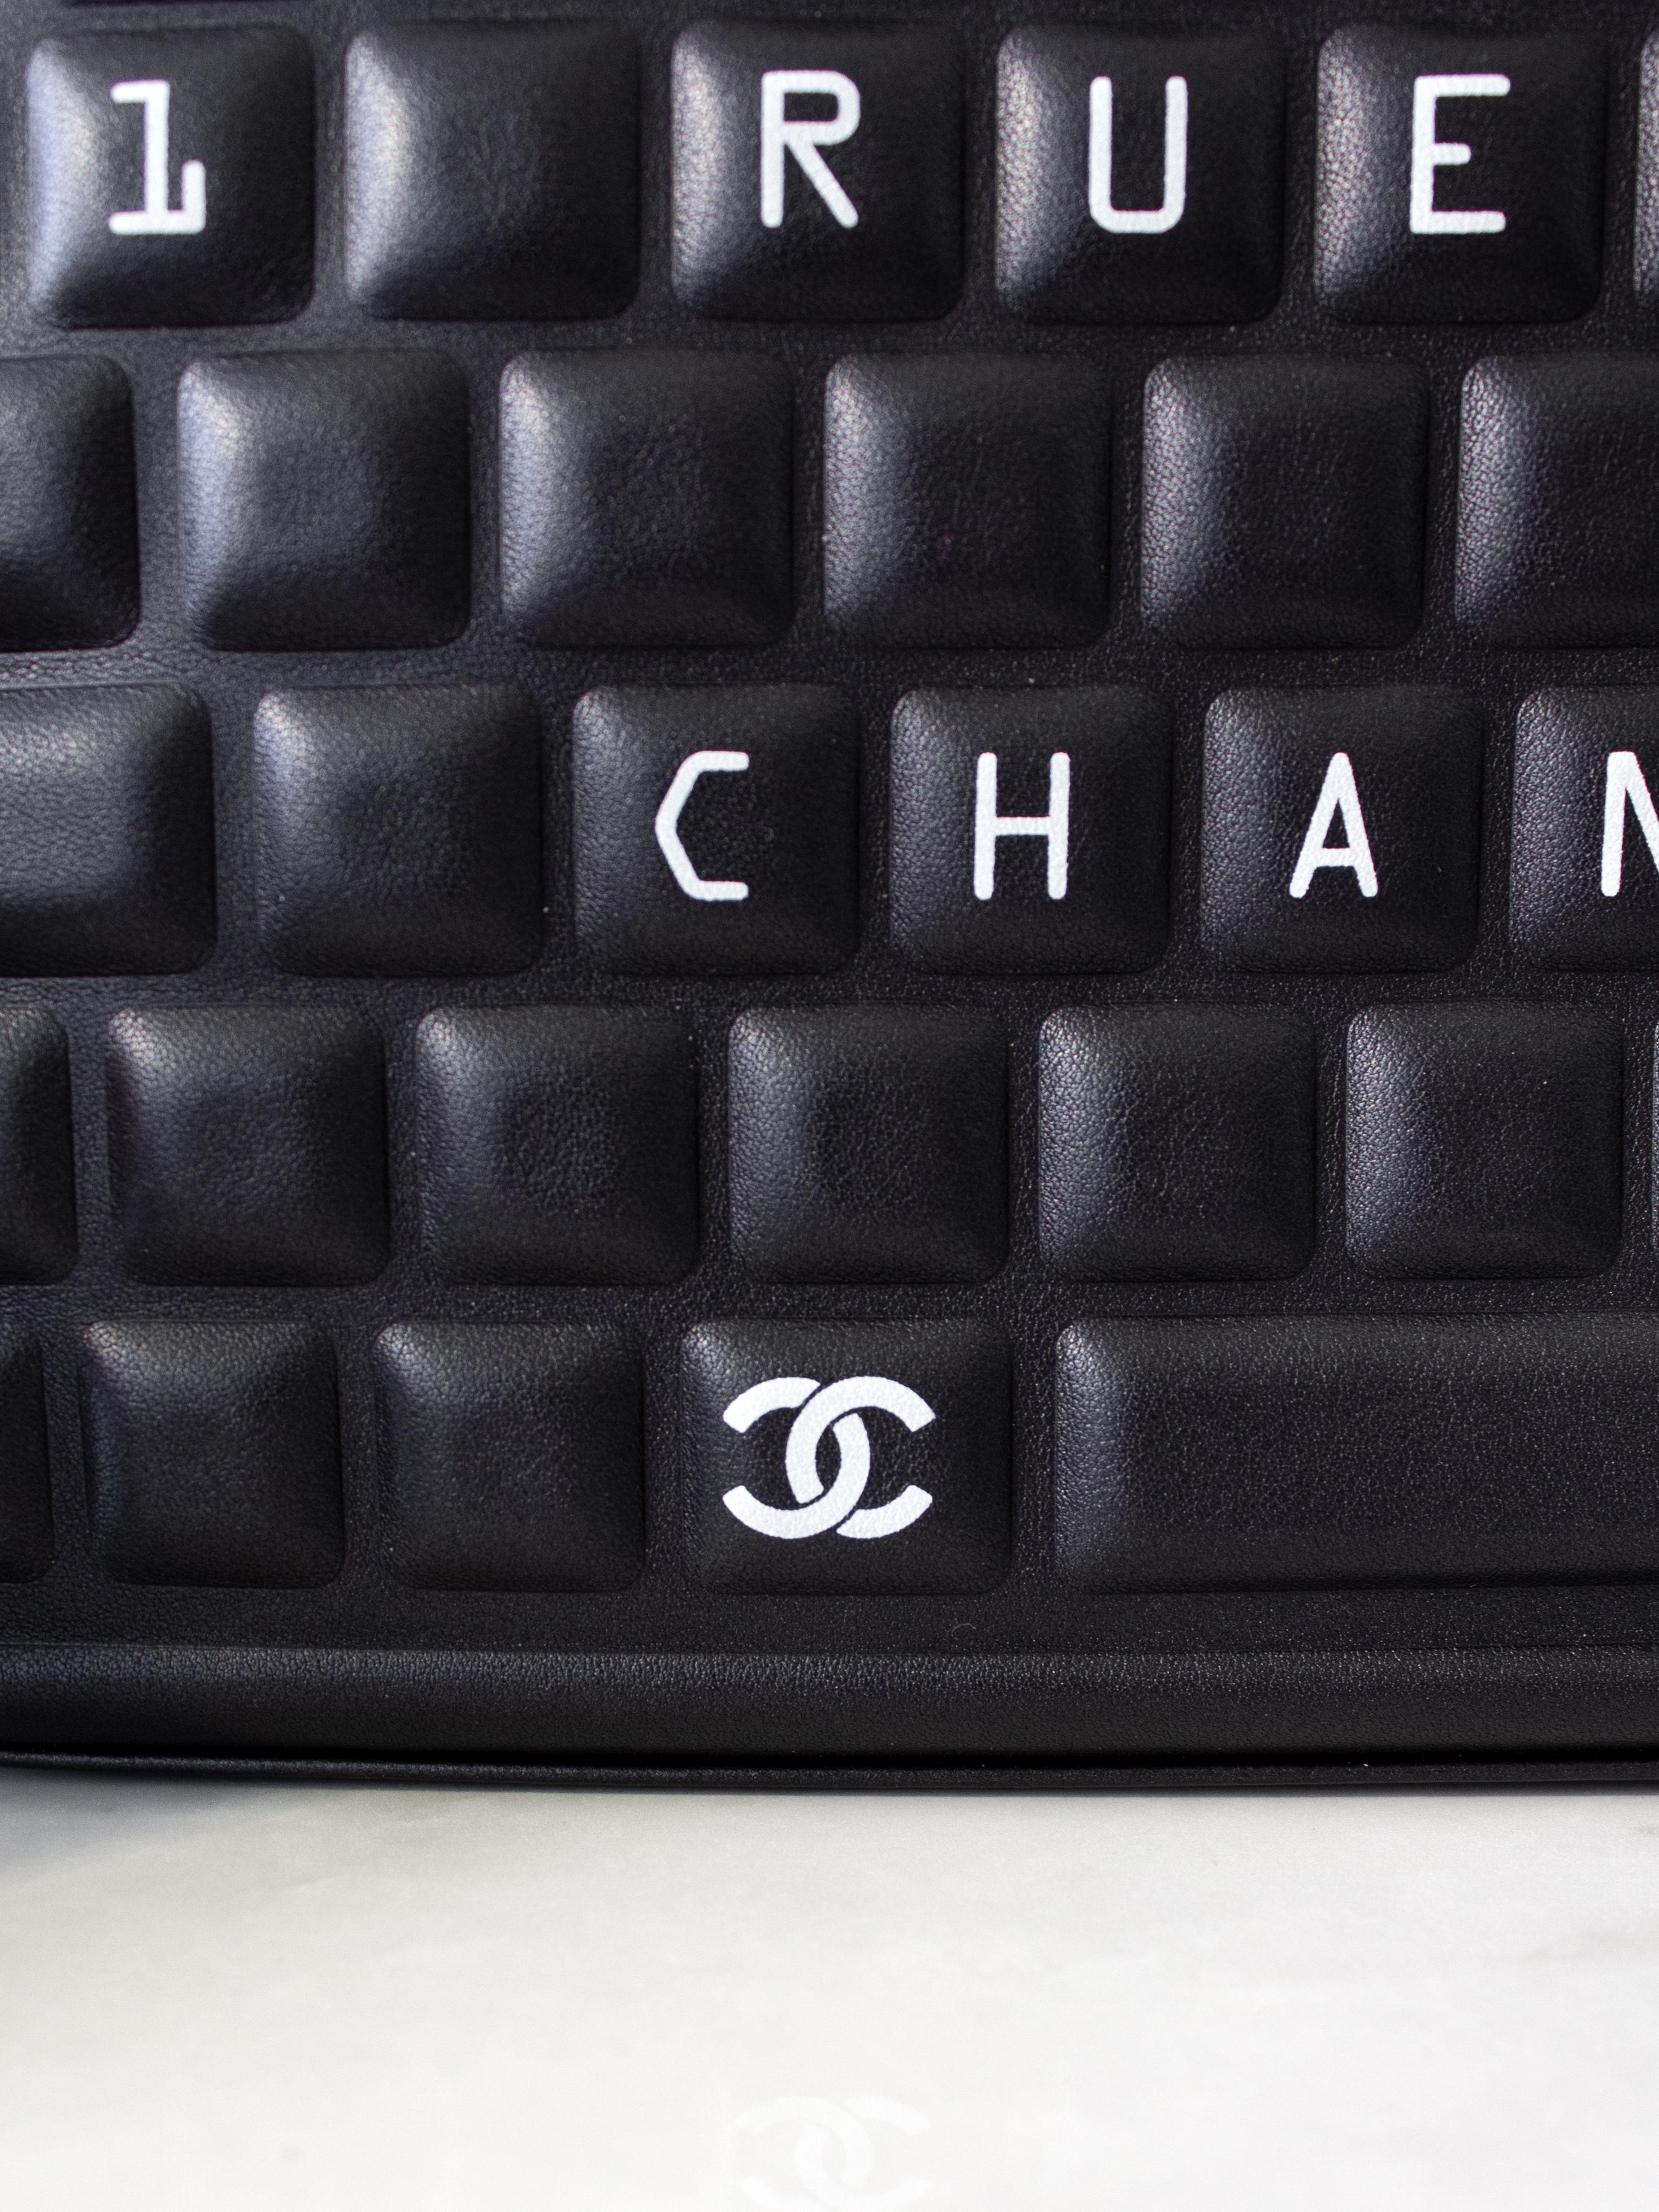 Chanel S/S 2017 Data Center Black Silver Robot Cocobot Leather Keyboard Clutch  2